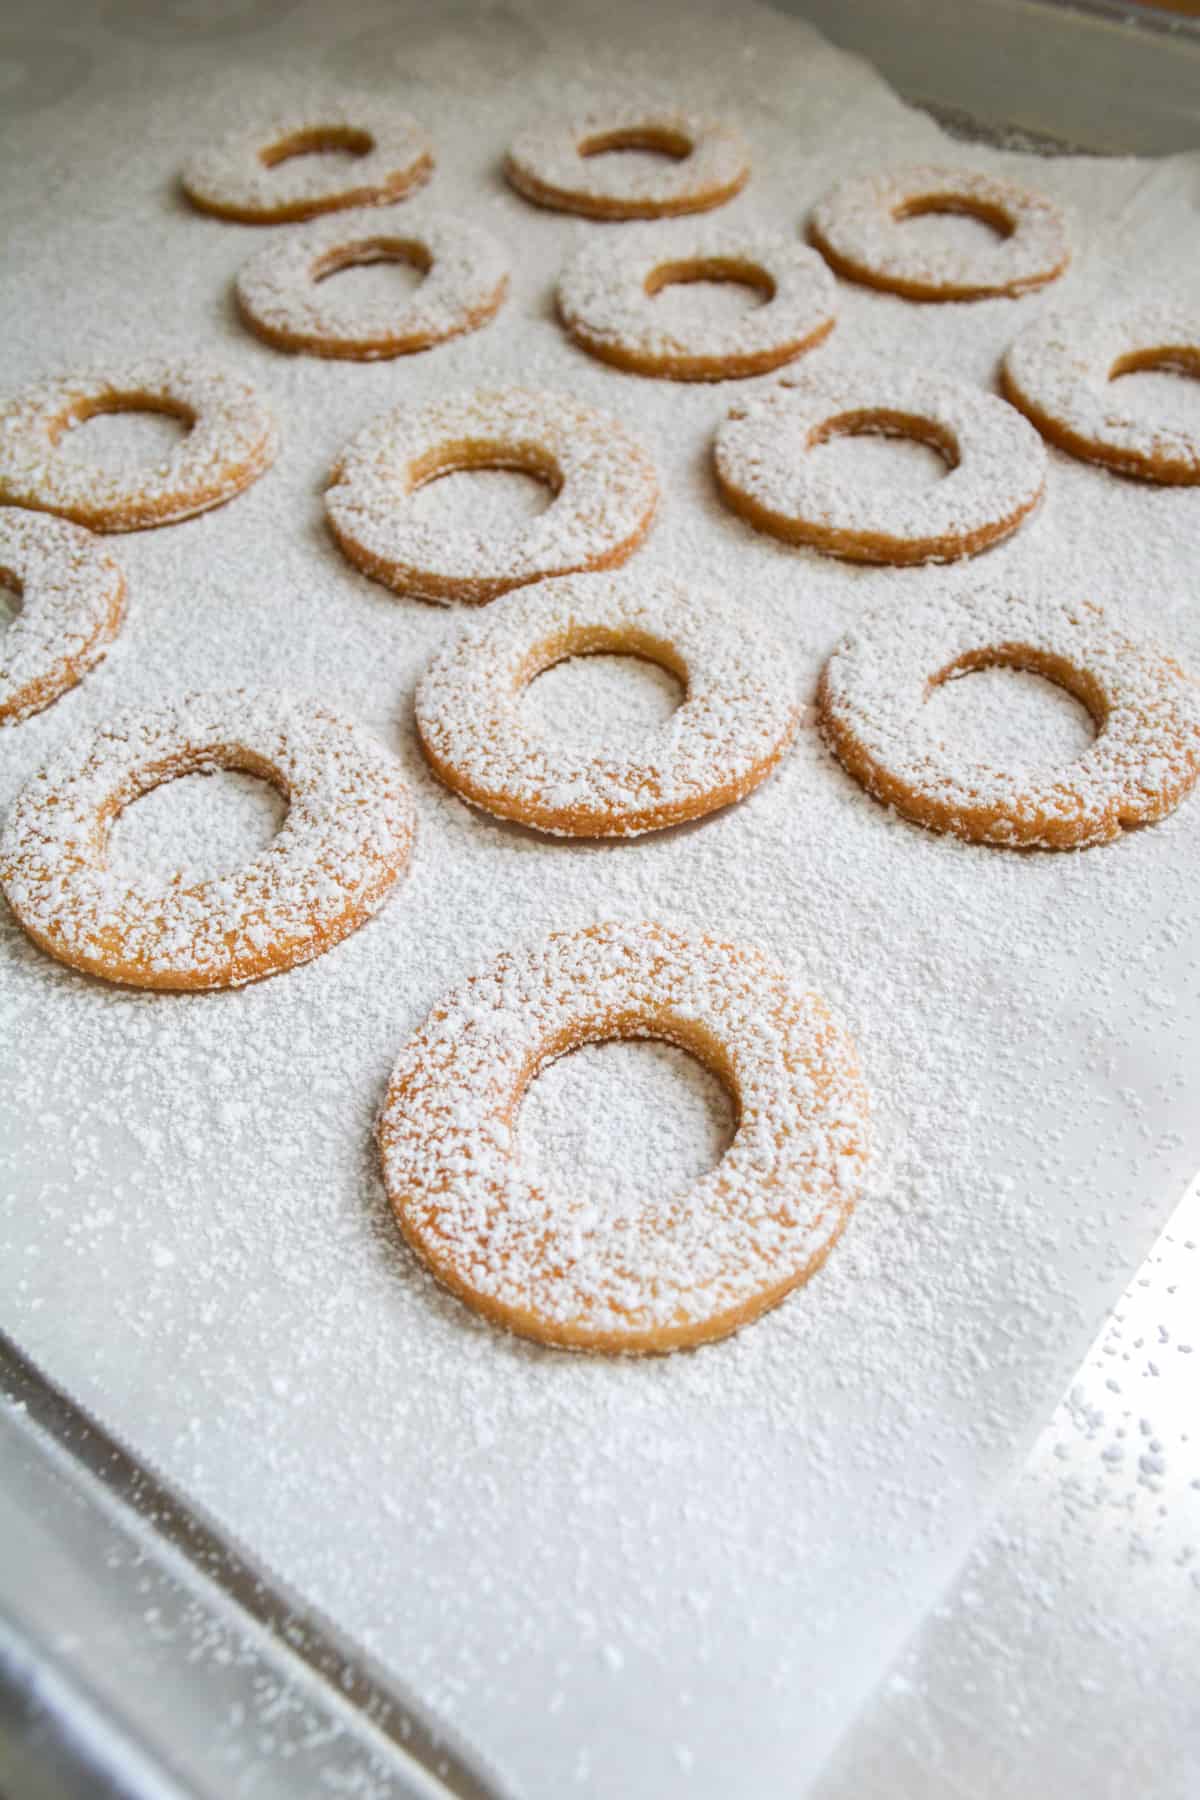 Baked nut-free vegan linzer cookie tops, dusted with powdered sugar.